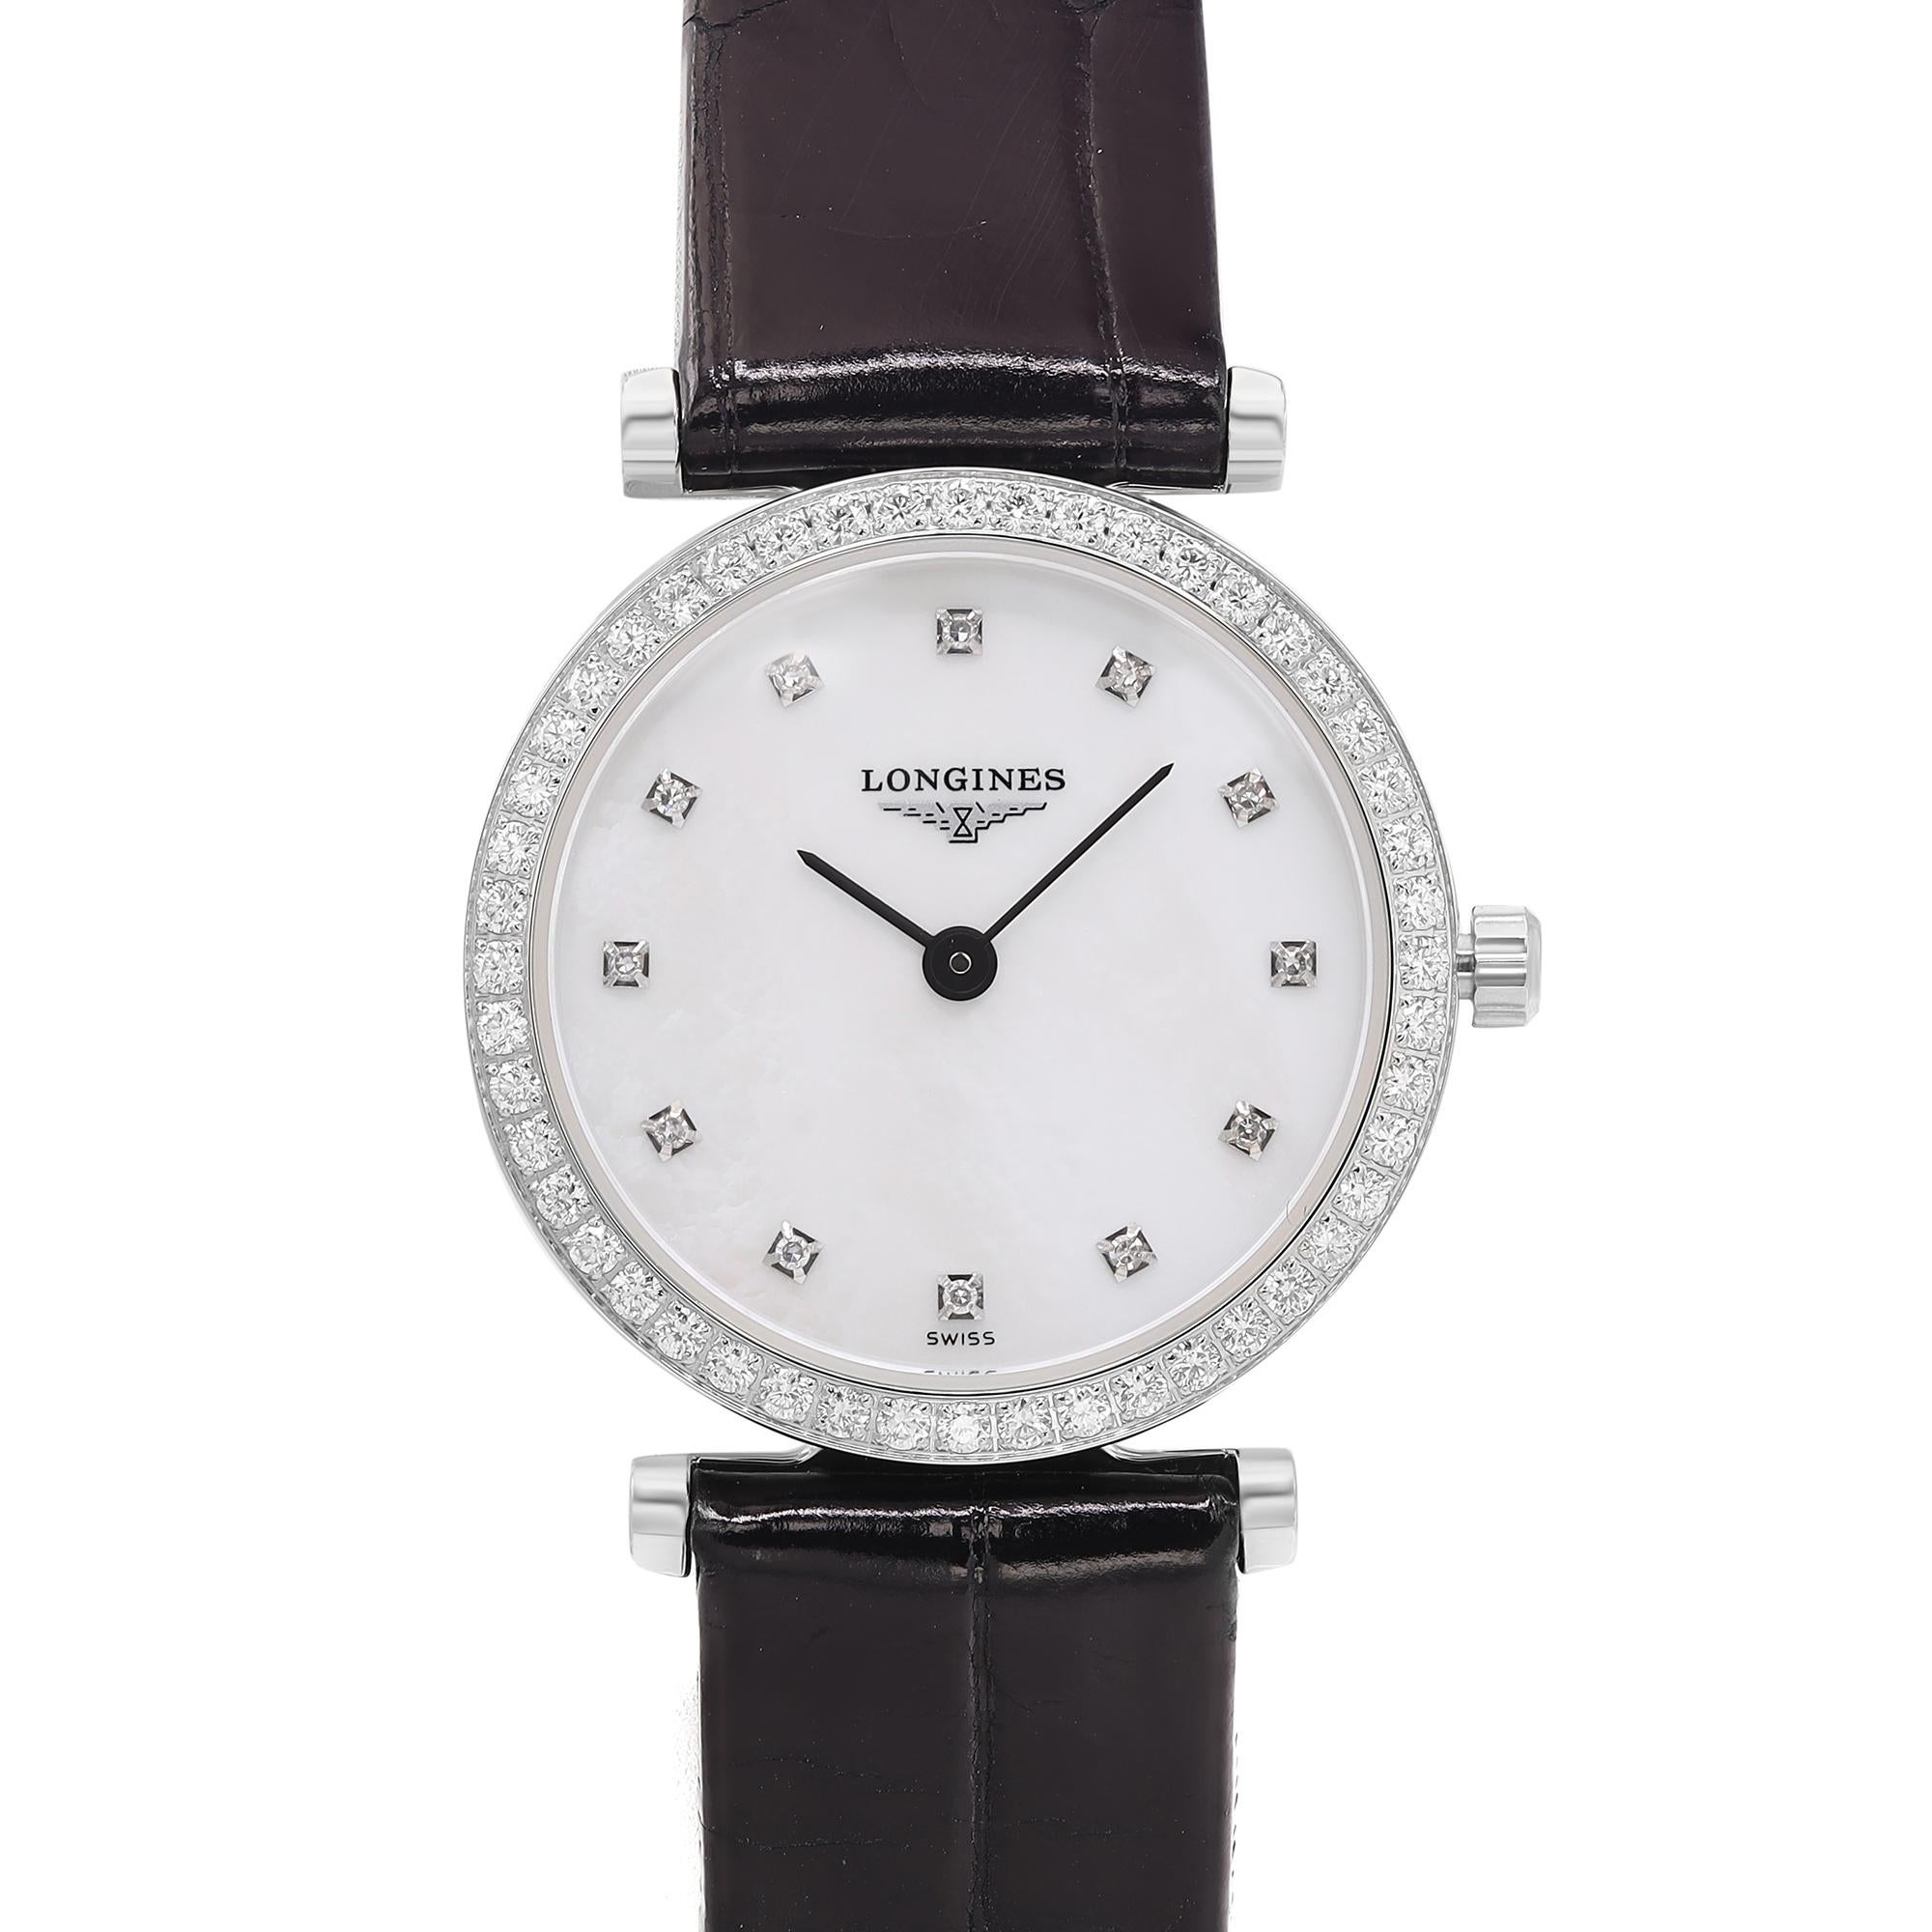 This Longines la Grande Classique lady's watch has never been worn or used and only has tiny wrinkles on the band due to displaying in the store. The dial and bezel have 60 diamonds set at 0.437ct total. Comes with an original box and paper.